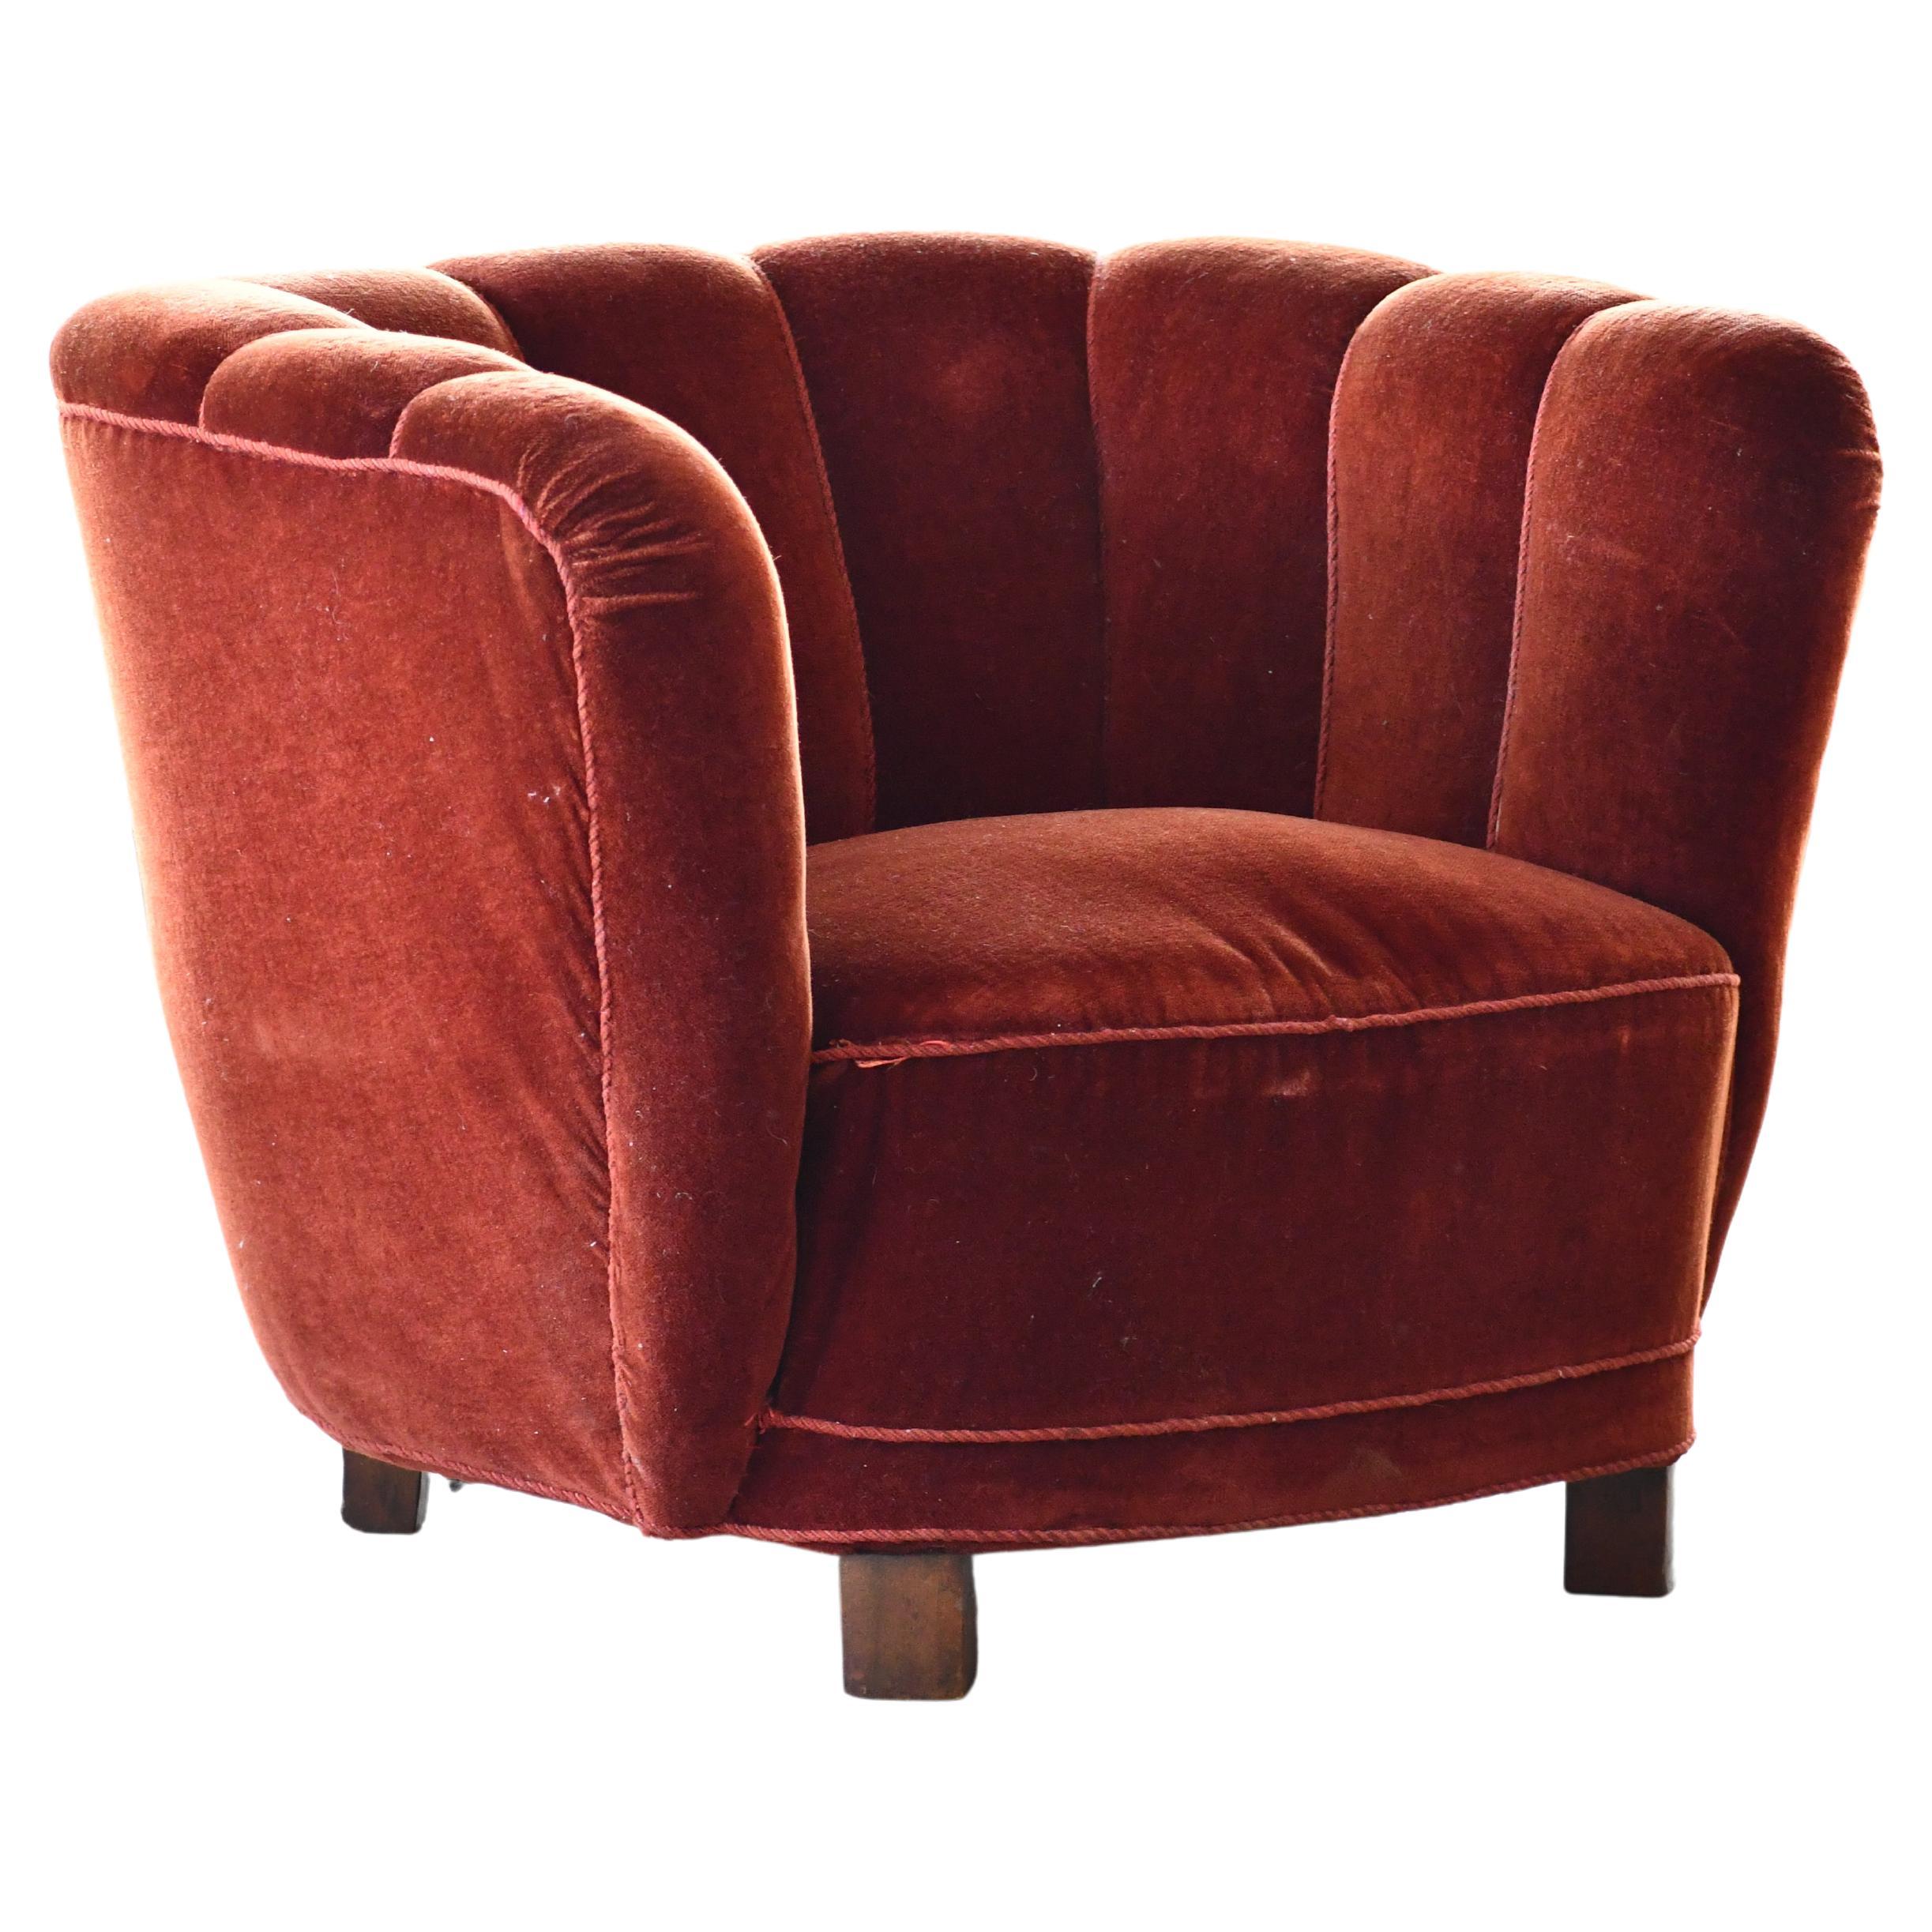 Danish 1940s Banana Style Curved Tub Club Chair with Channel Back in Red Mohair For Sale